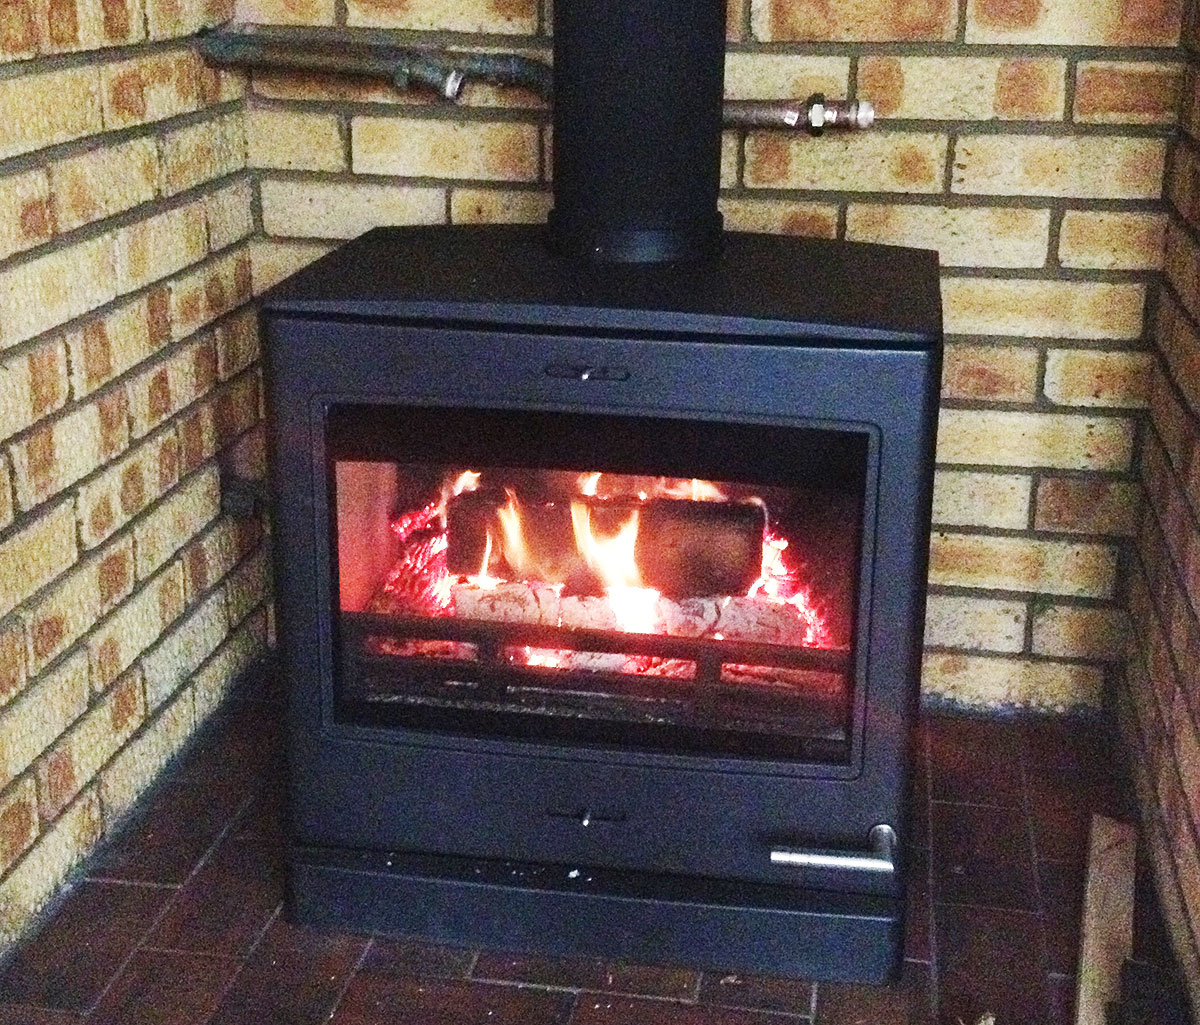 Ban on wood stoves? The truth of it all